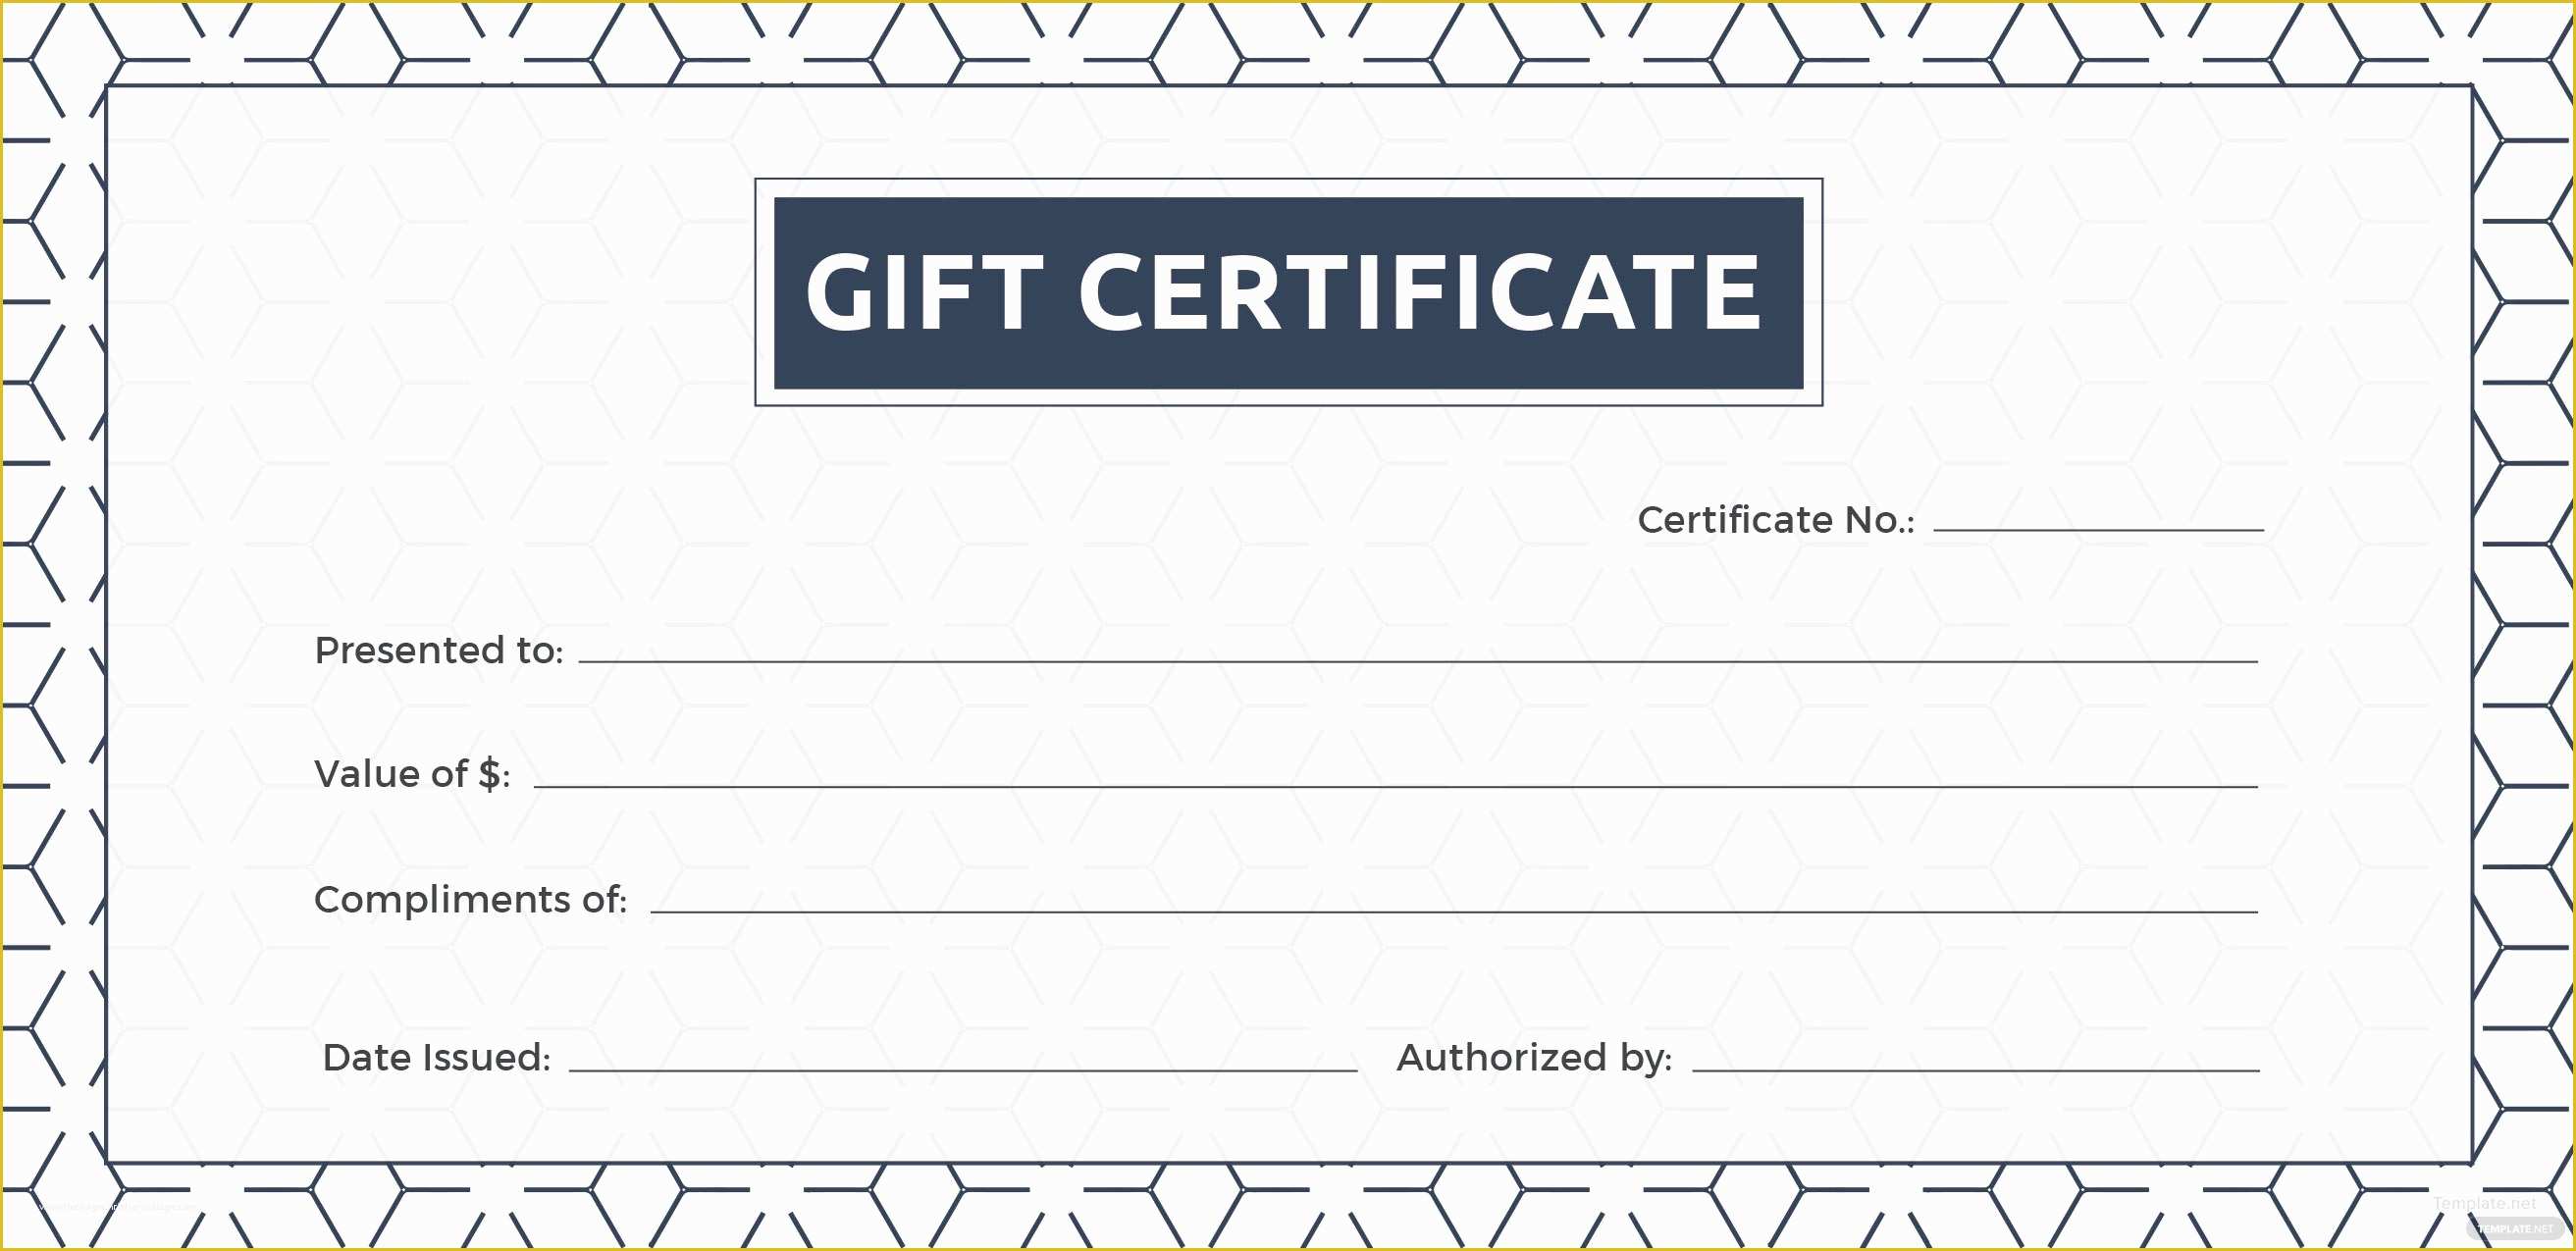 Gift Certificate Template Free Of Free Blank Gift Certificate Template In Adobe Illustrator